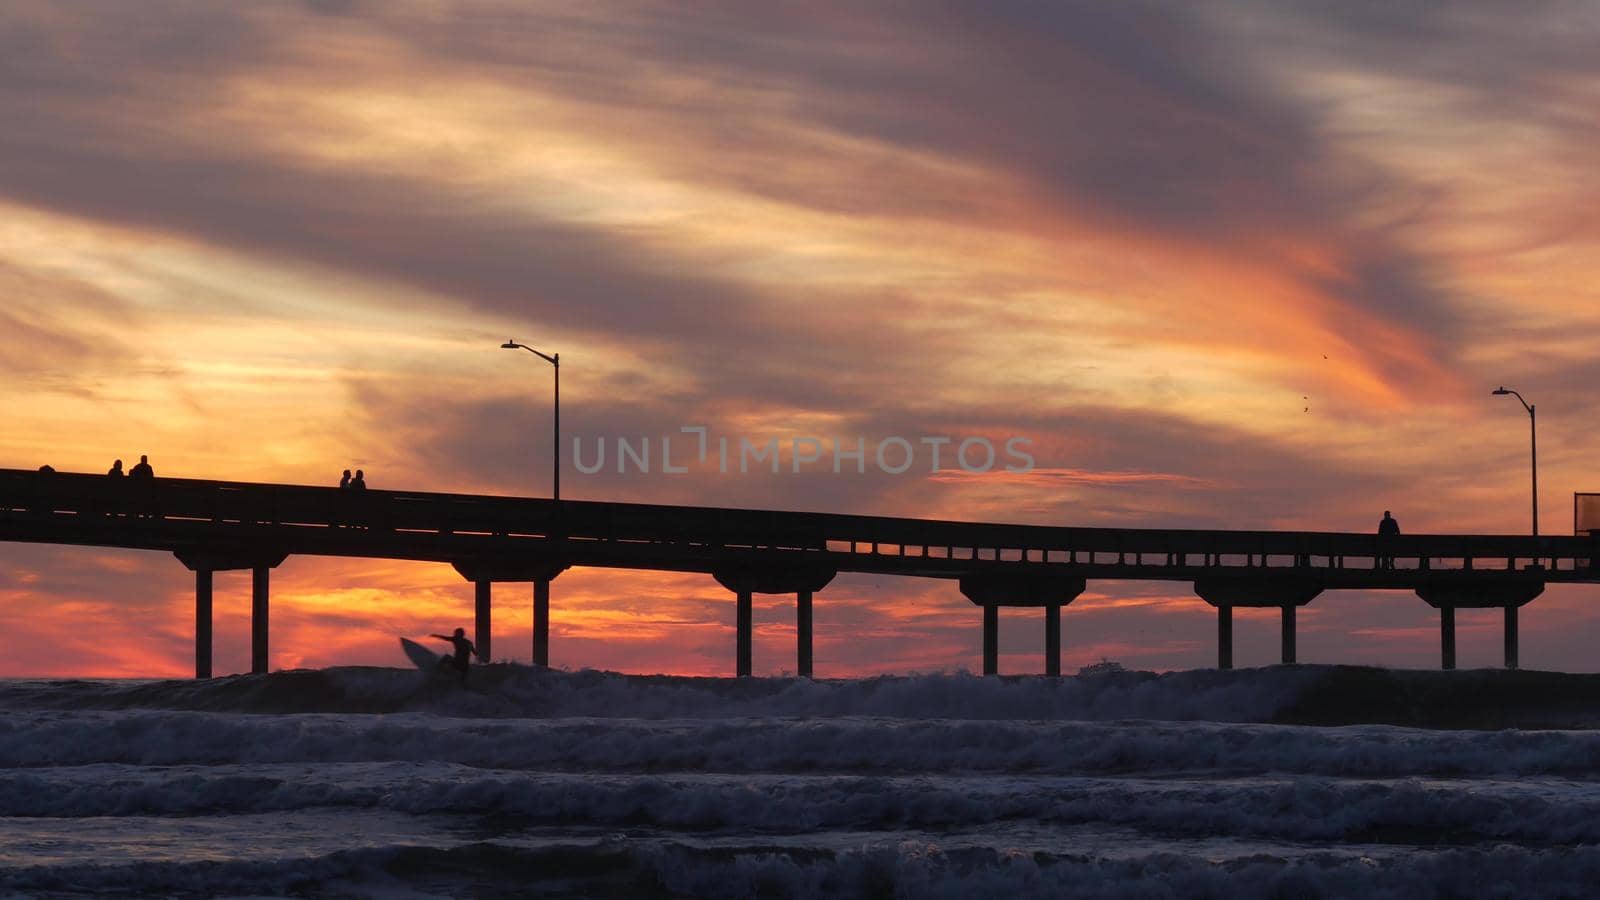 Silhouette of people walking, surfers surfing by pier in sea water. Ocean waves, dramatic sky at sunset. California coast, beach or shore vibes at sundown. Summer seascape seamless looped cinemagraph.